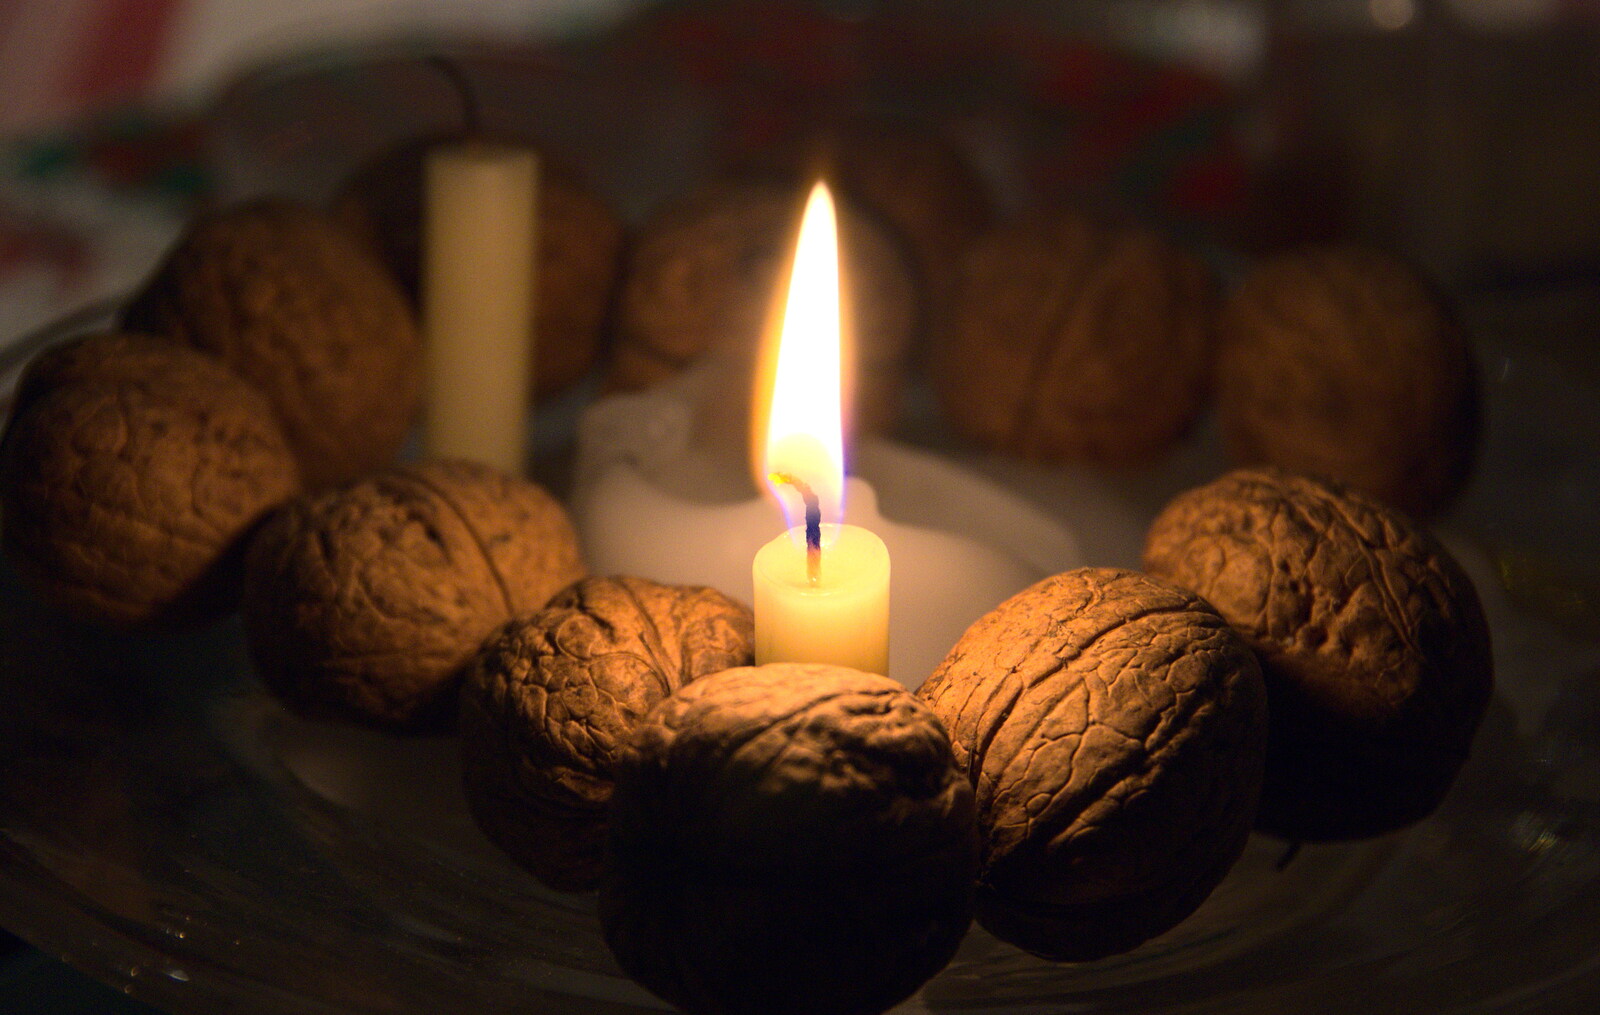 A candle and walnuts from Christmas Day and The Swan Inn, Brome, Suffolk - 25th December 2017